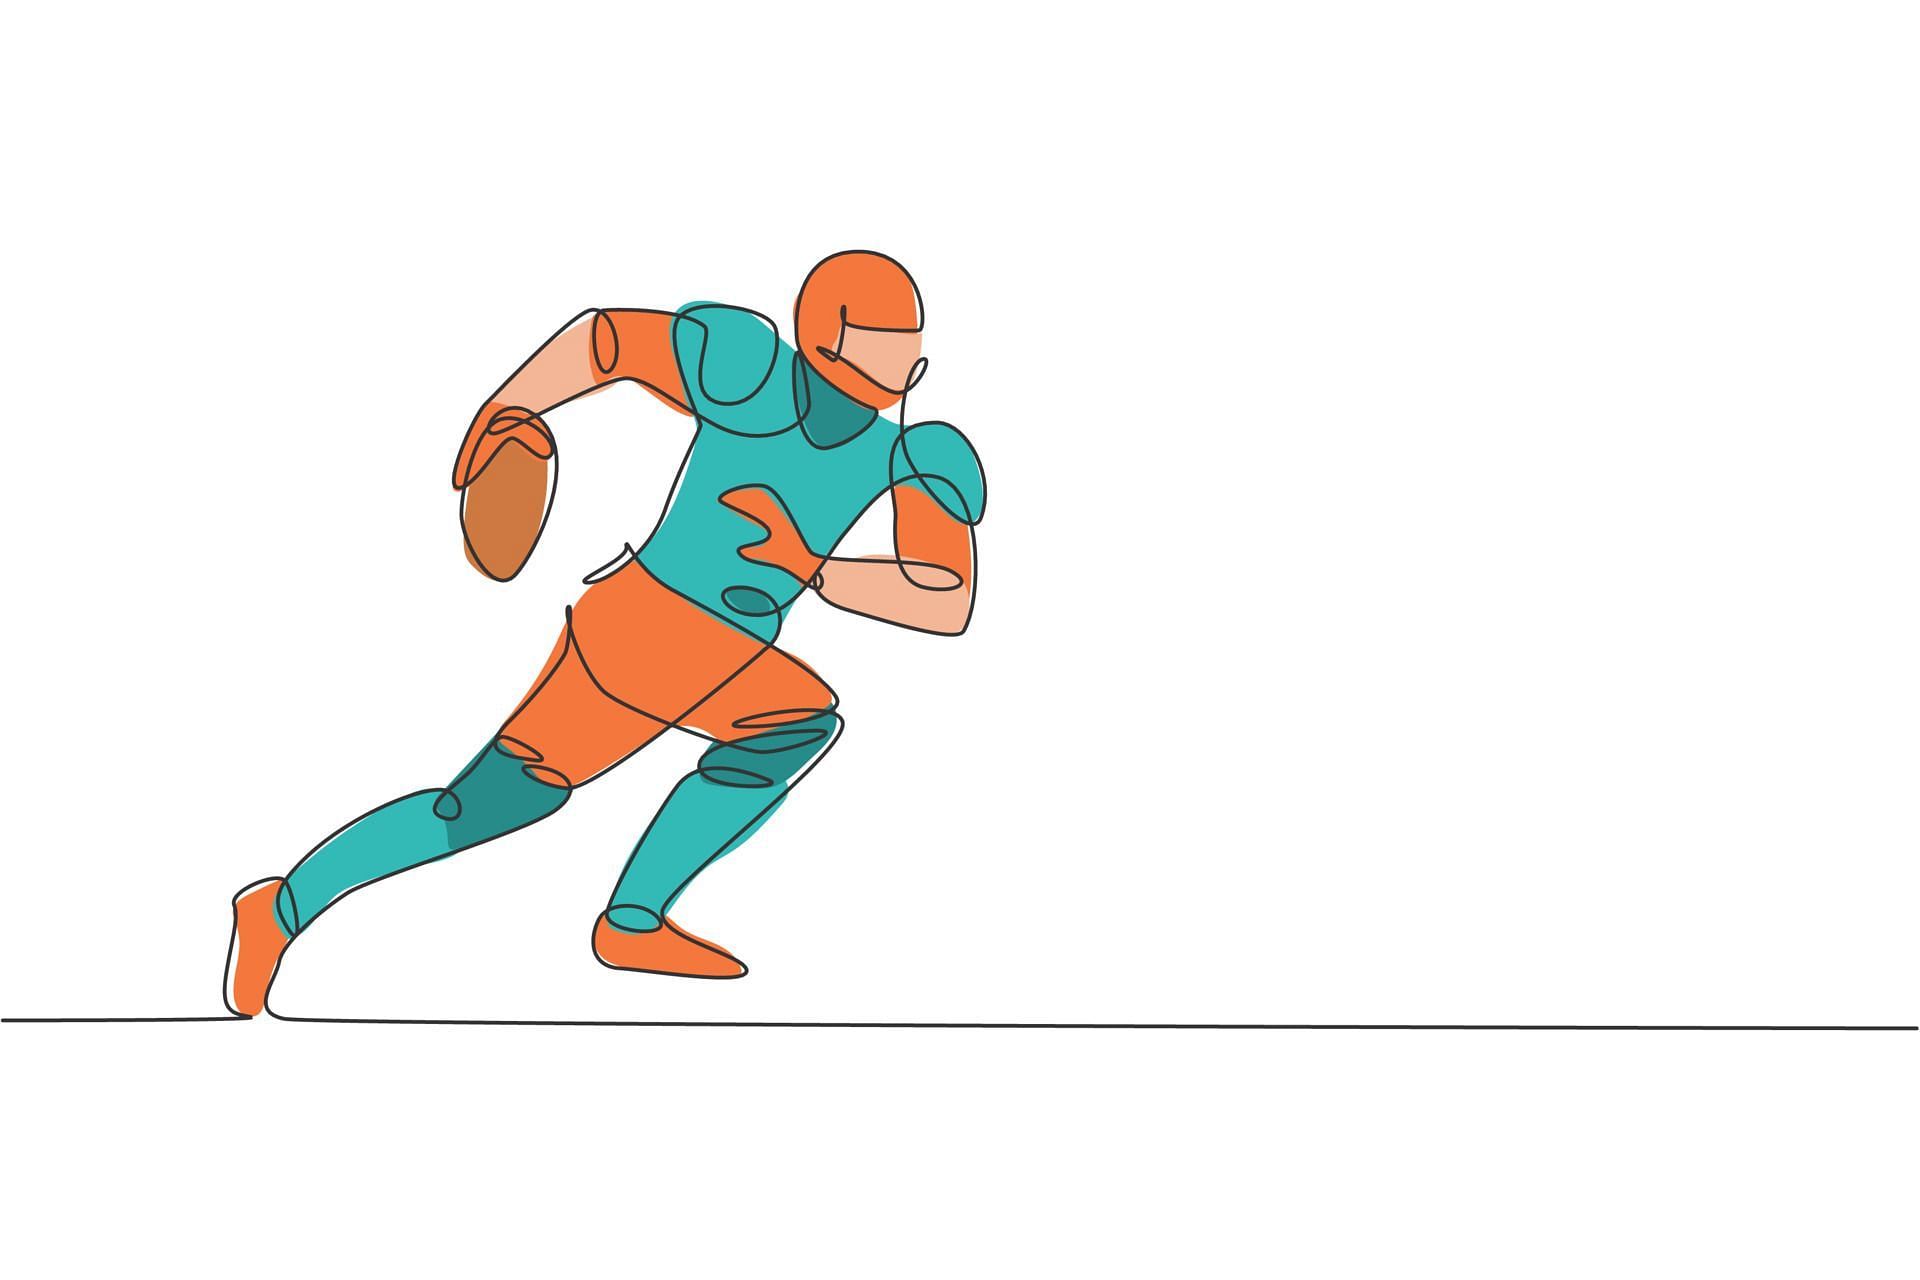 Football players are also human at the end of the day and can feel anxious like anyon else. (Image via Vecteezy/ SimpleLine)